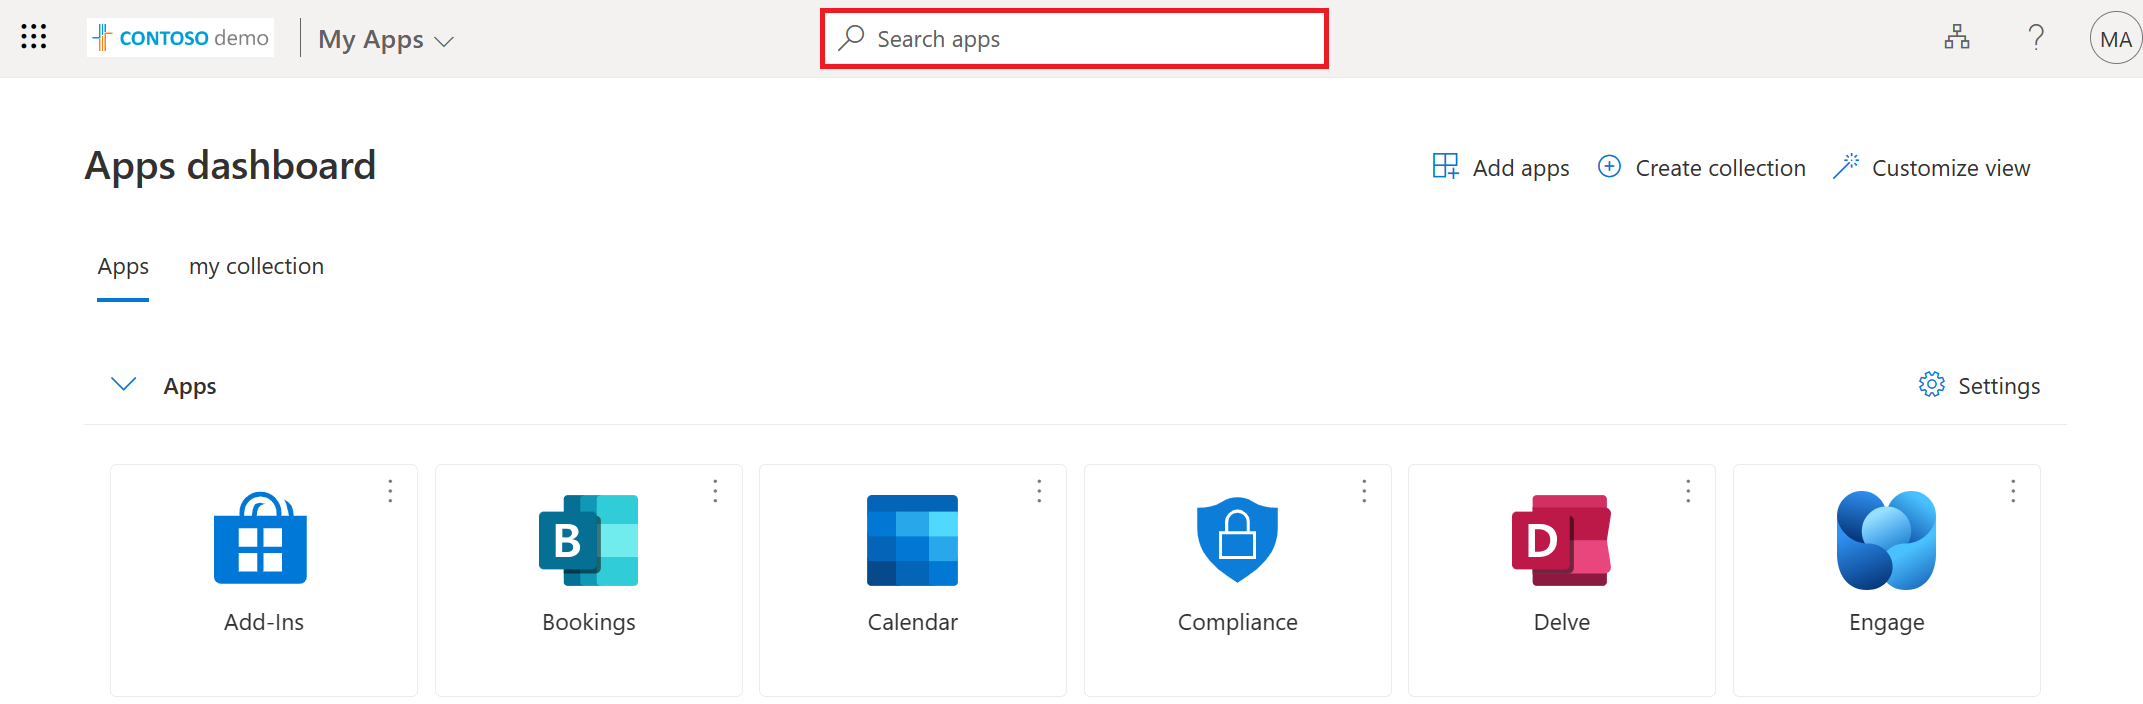 My Apps Portal Overview - Microsoft Entra | Microsoft Learn